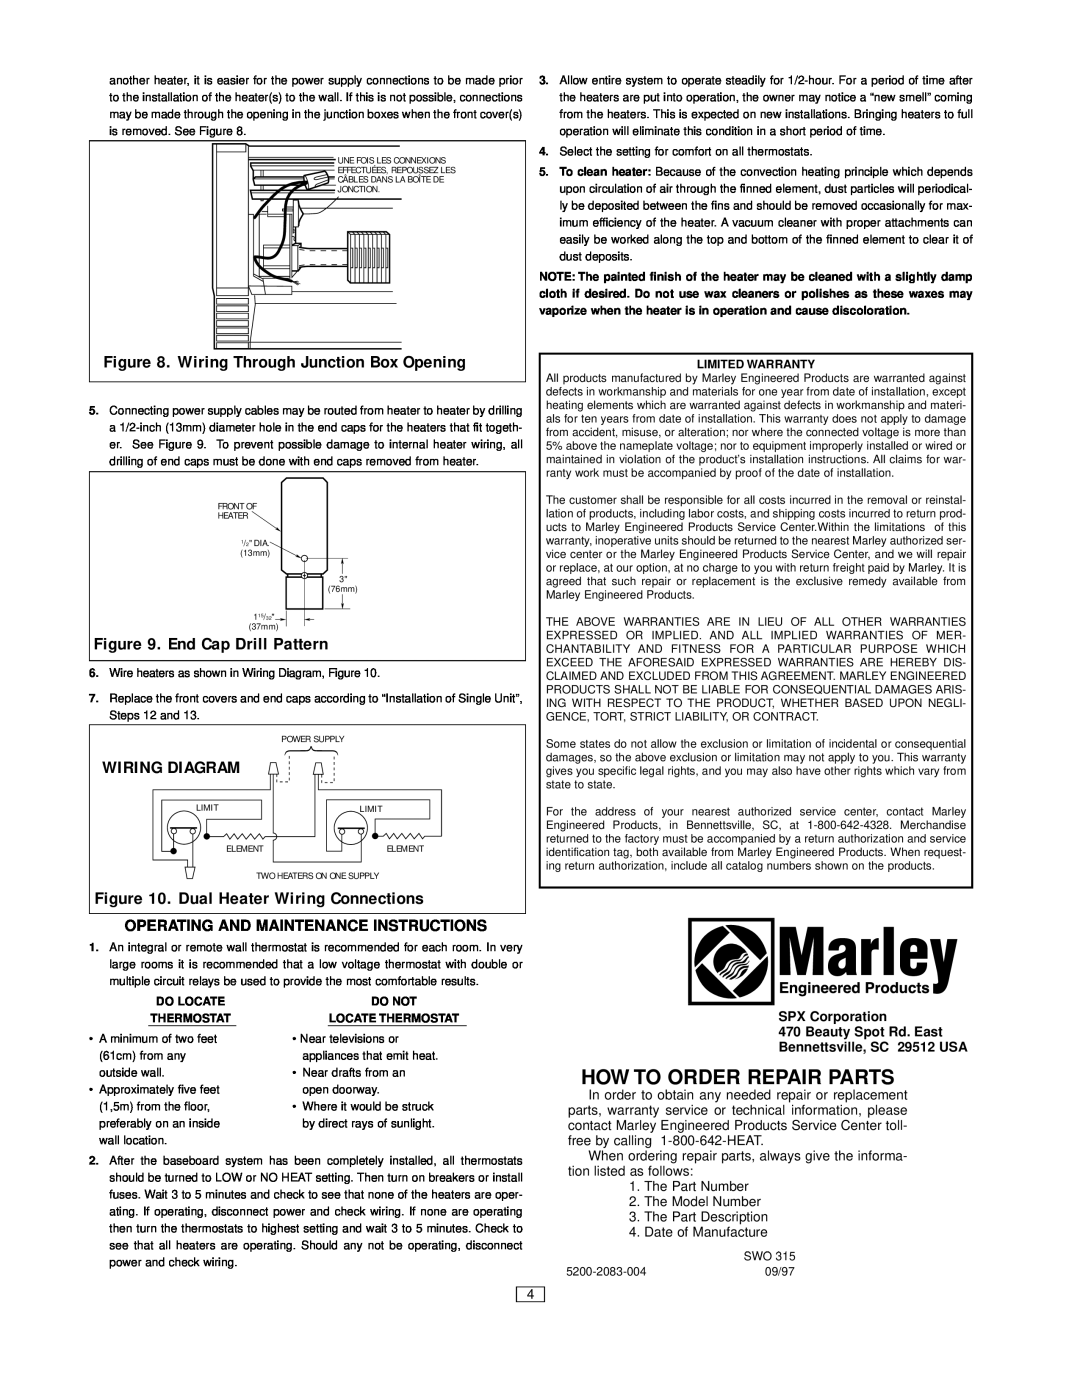 Marley Engineered Products End Cap Drill Pattern, Dual Heater Wiring Connections, How To Order Repair Parts, Do Not 